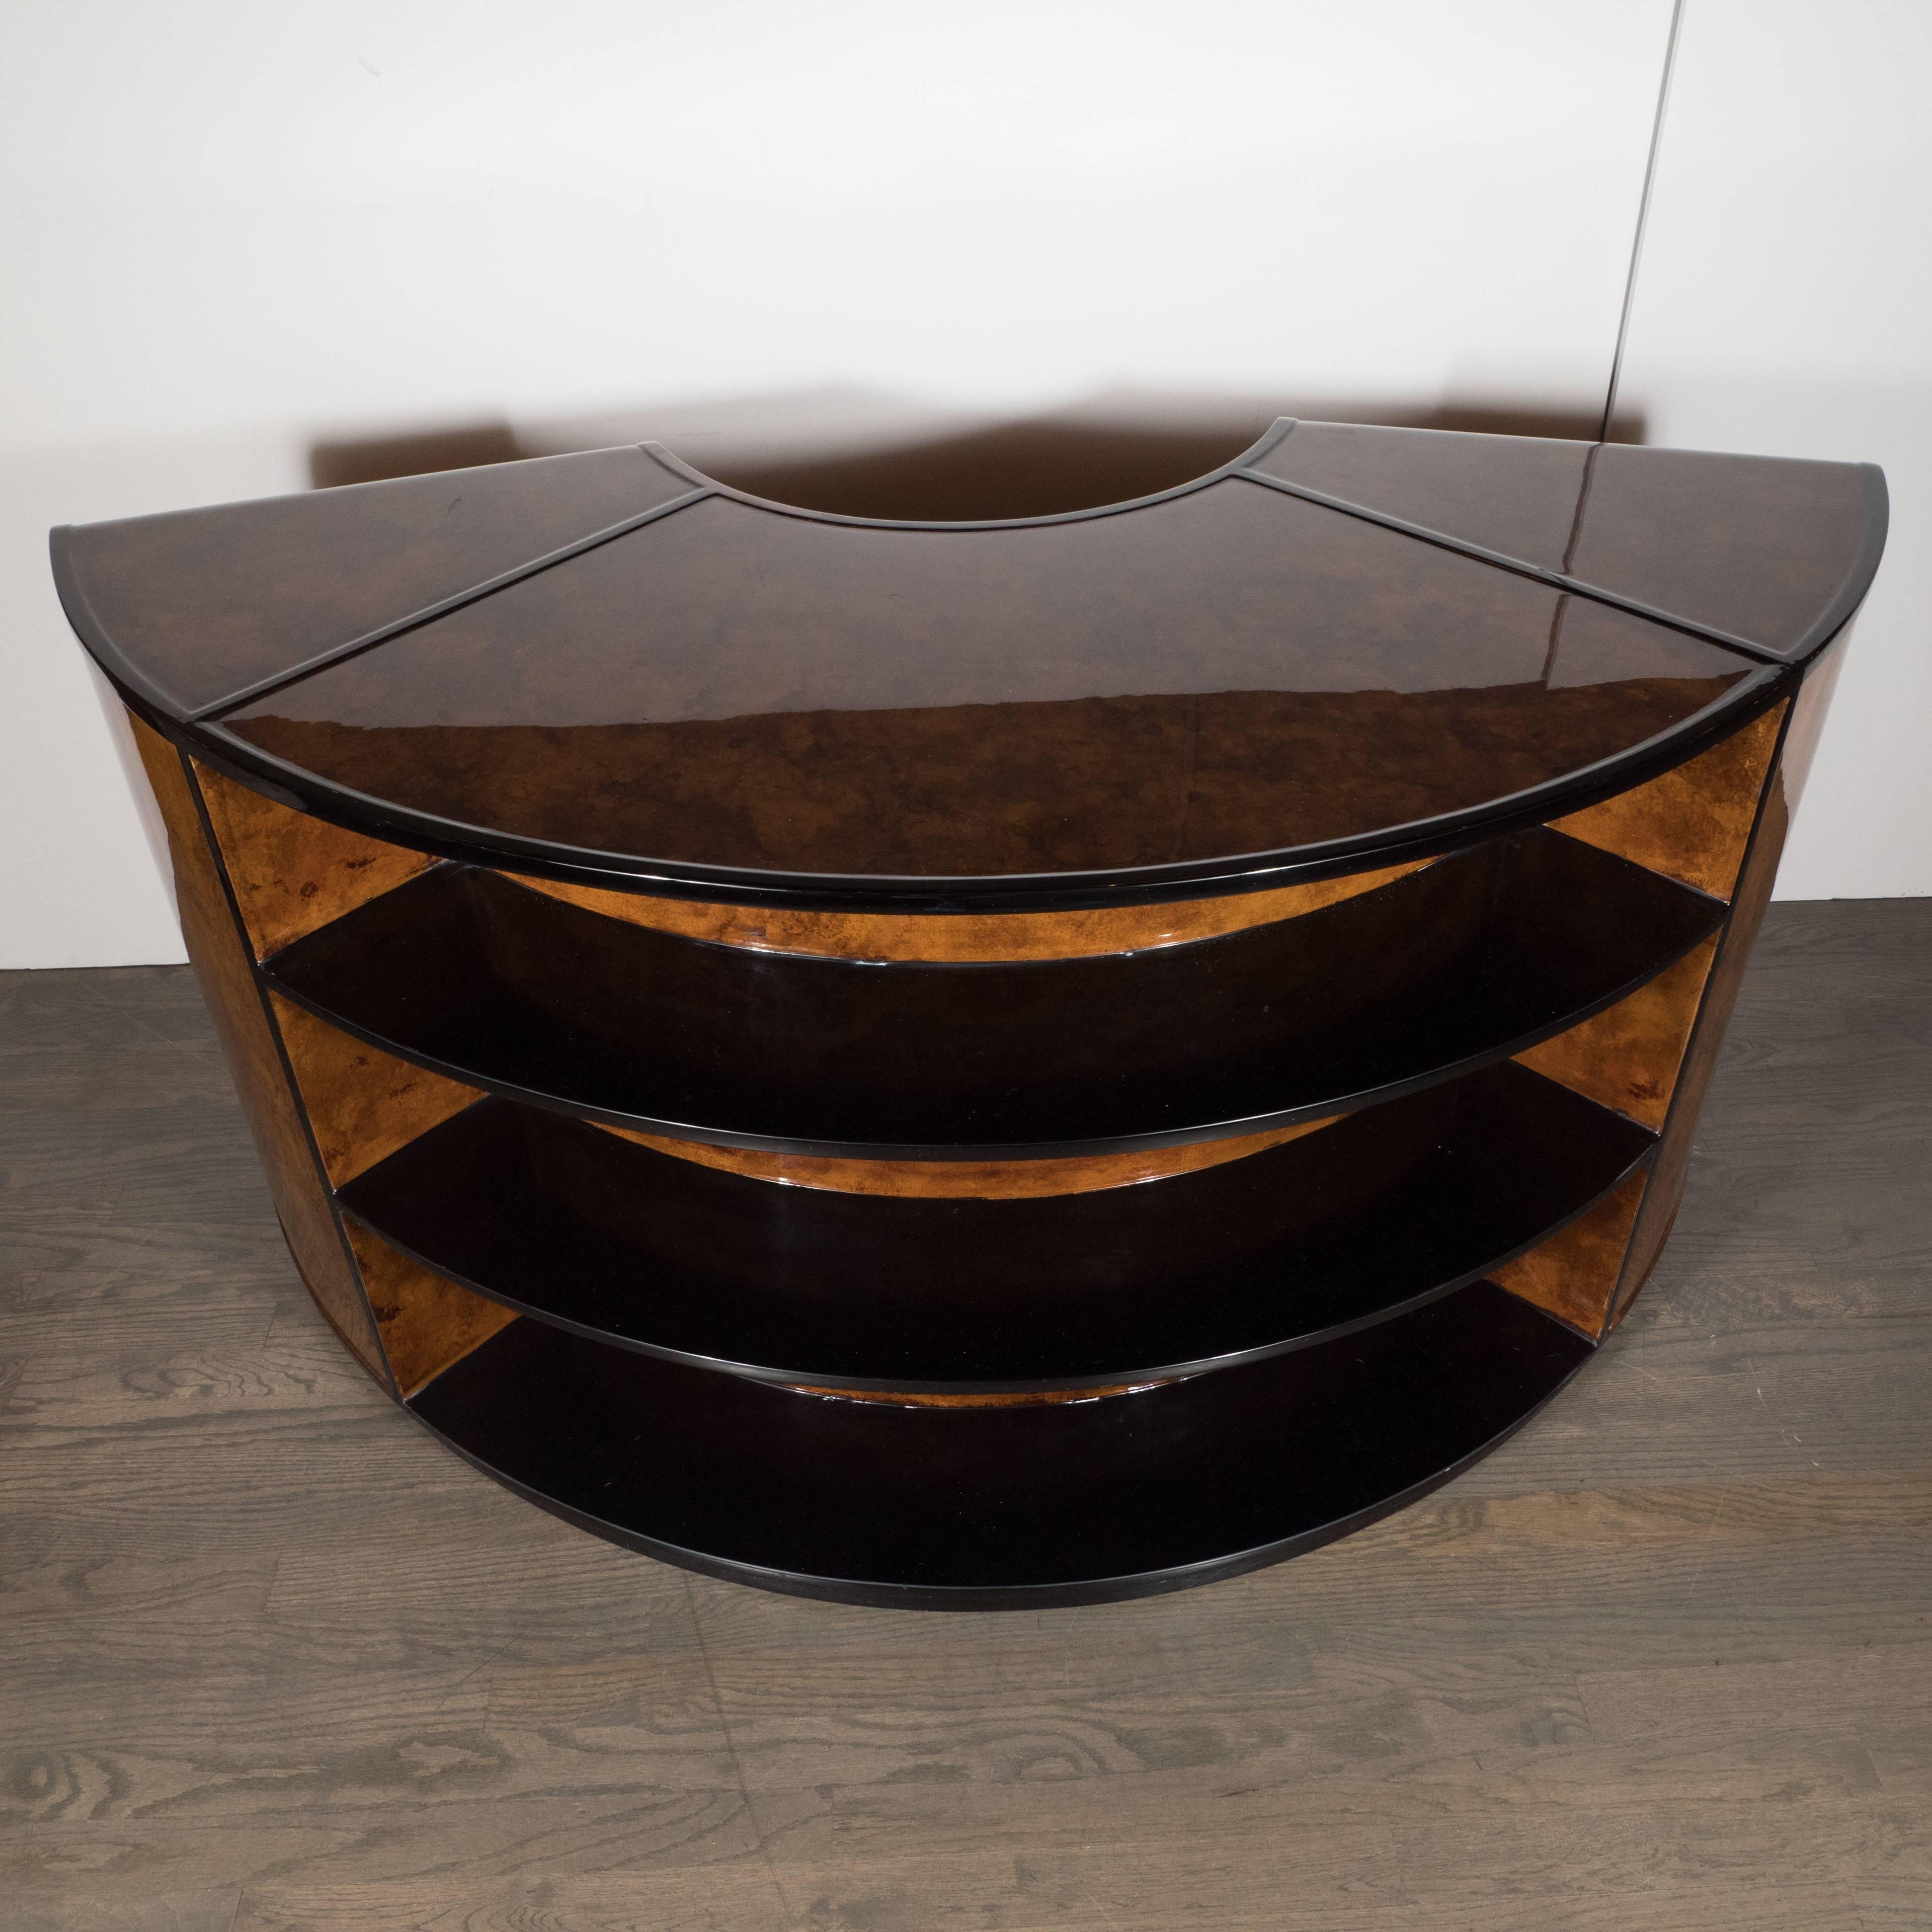 Mid-20th Century American Art Deco Book-Matched Burled Carpathian Elm and Black Lacquer Desk